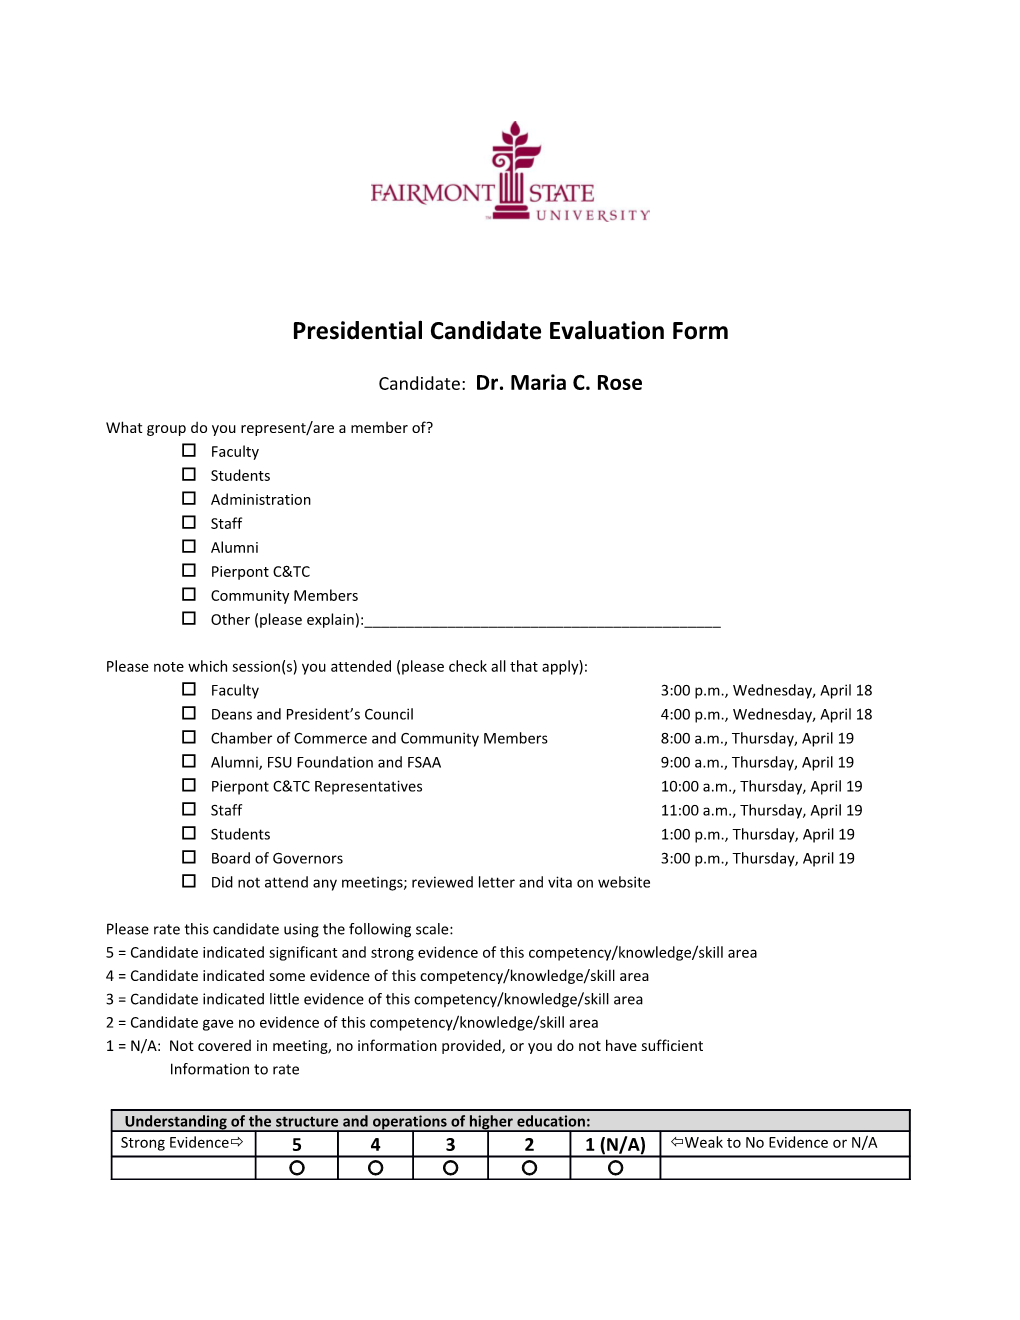 Presidential Candidate Evaluation Form